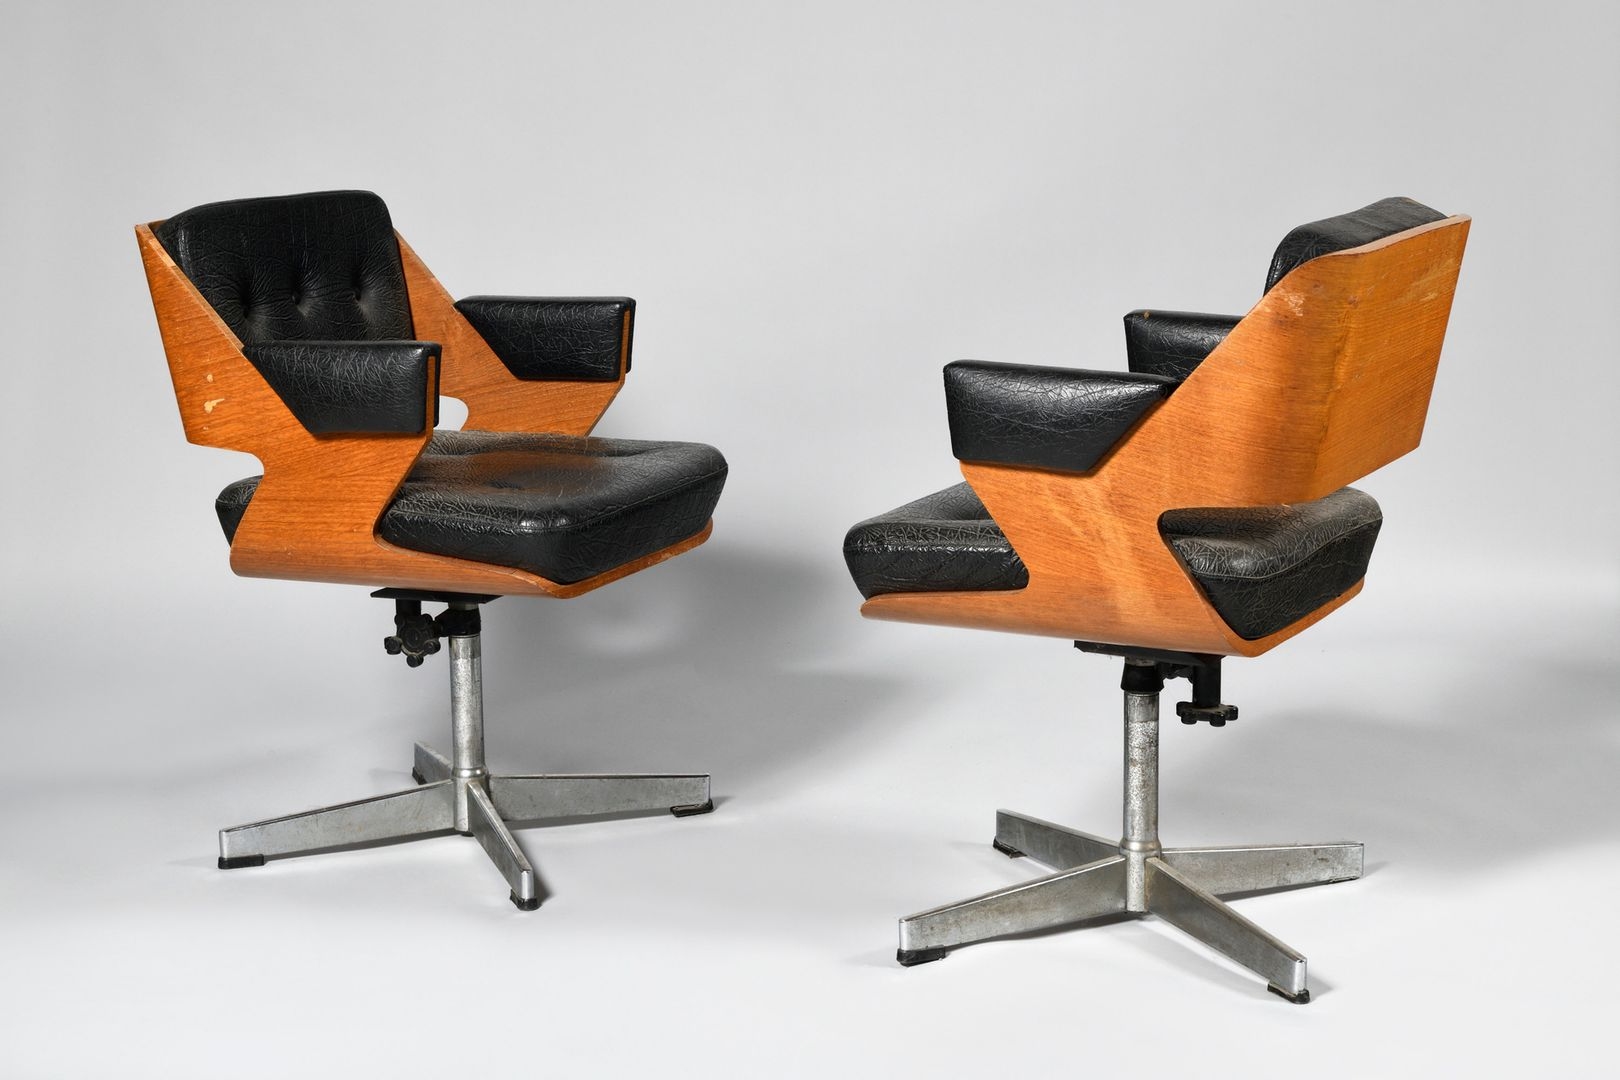 Aja ris forfader Martin Stoll | Pair of office chairs with rotating seats (1960) | MutualArt